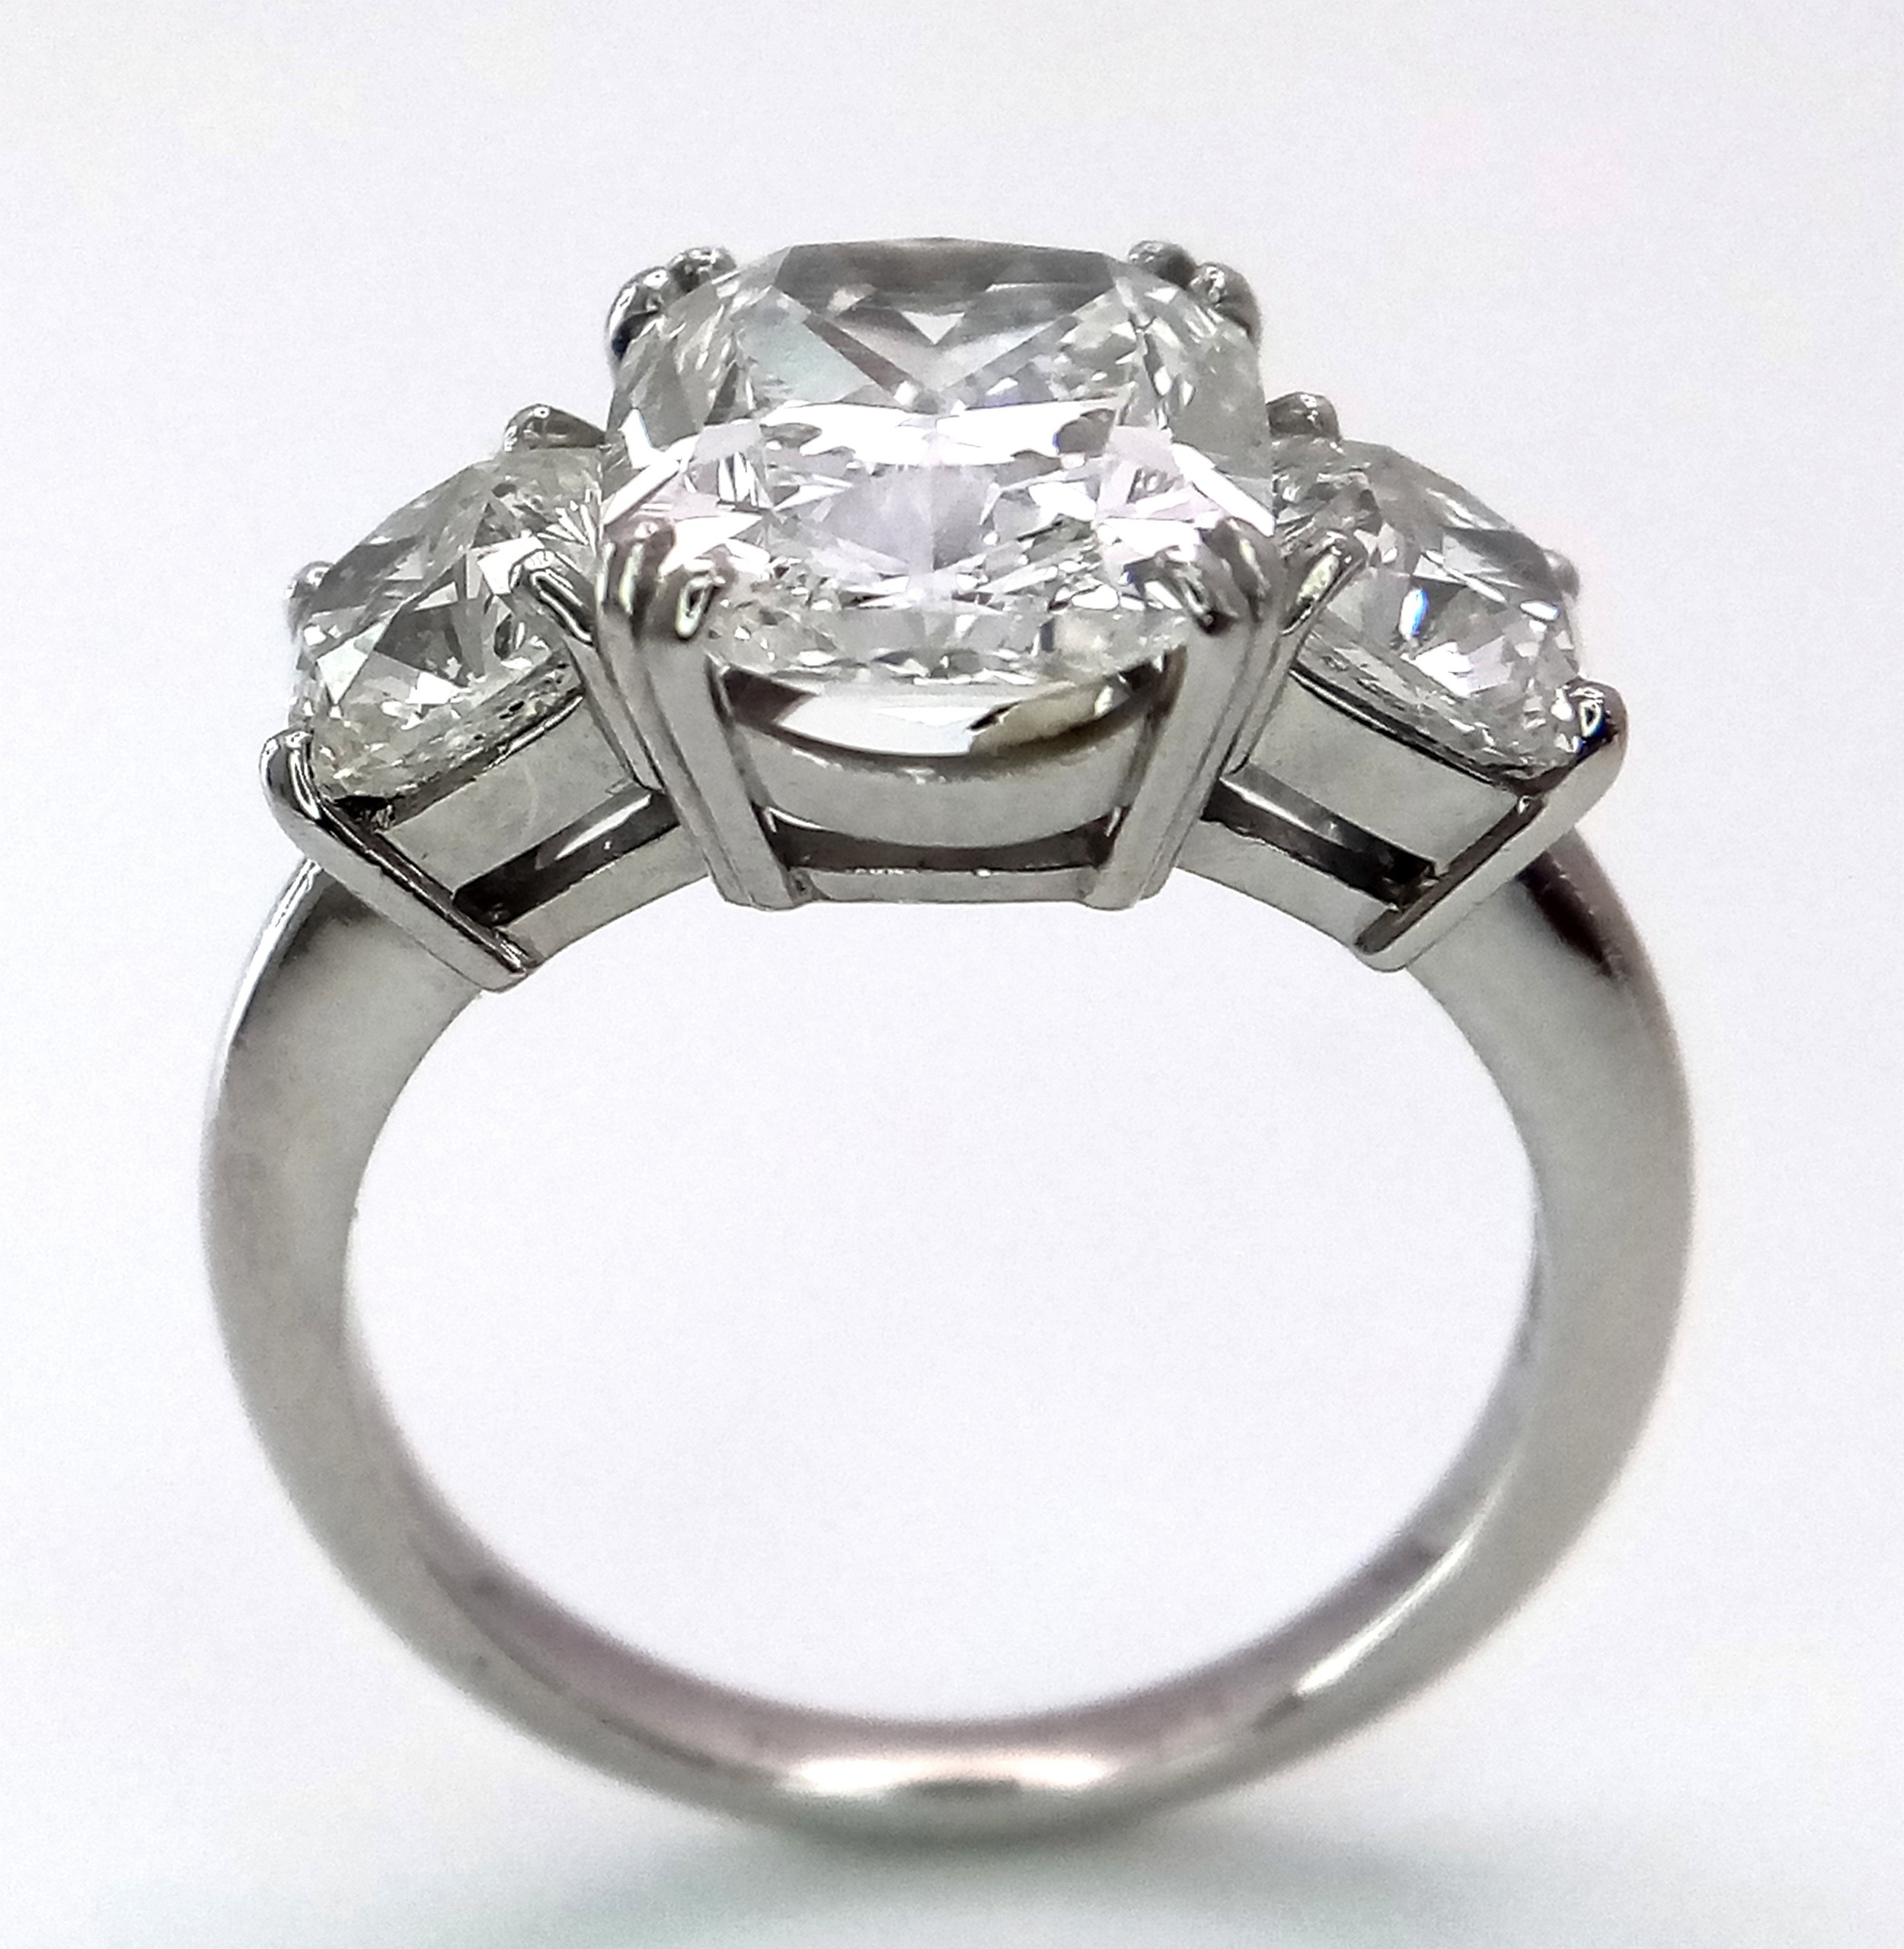 A Breathtaking 4.01ct GIA Certified Diamond Ring. A brilliant cushion cut 4.01ct central diamond - Image 10 of 22